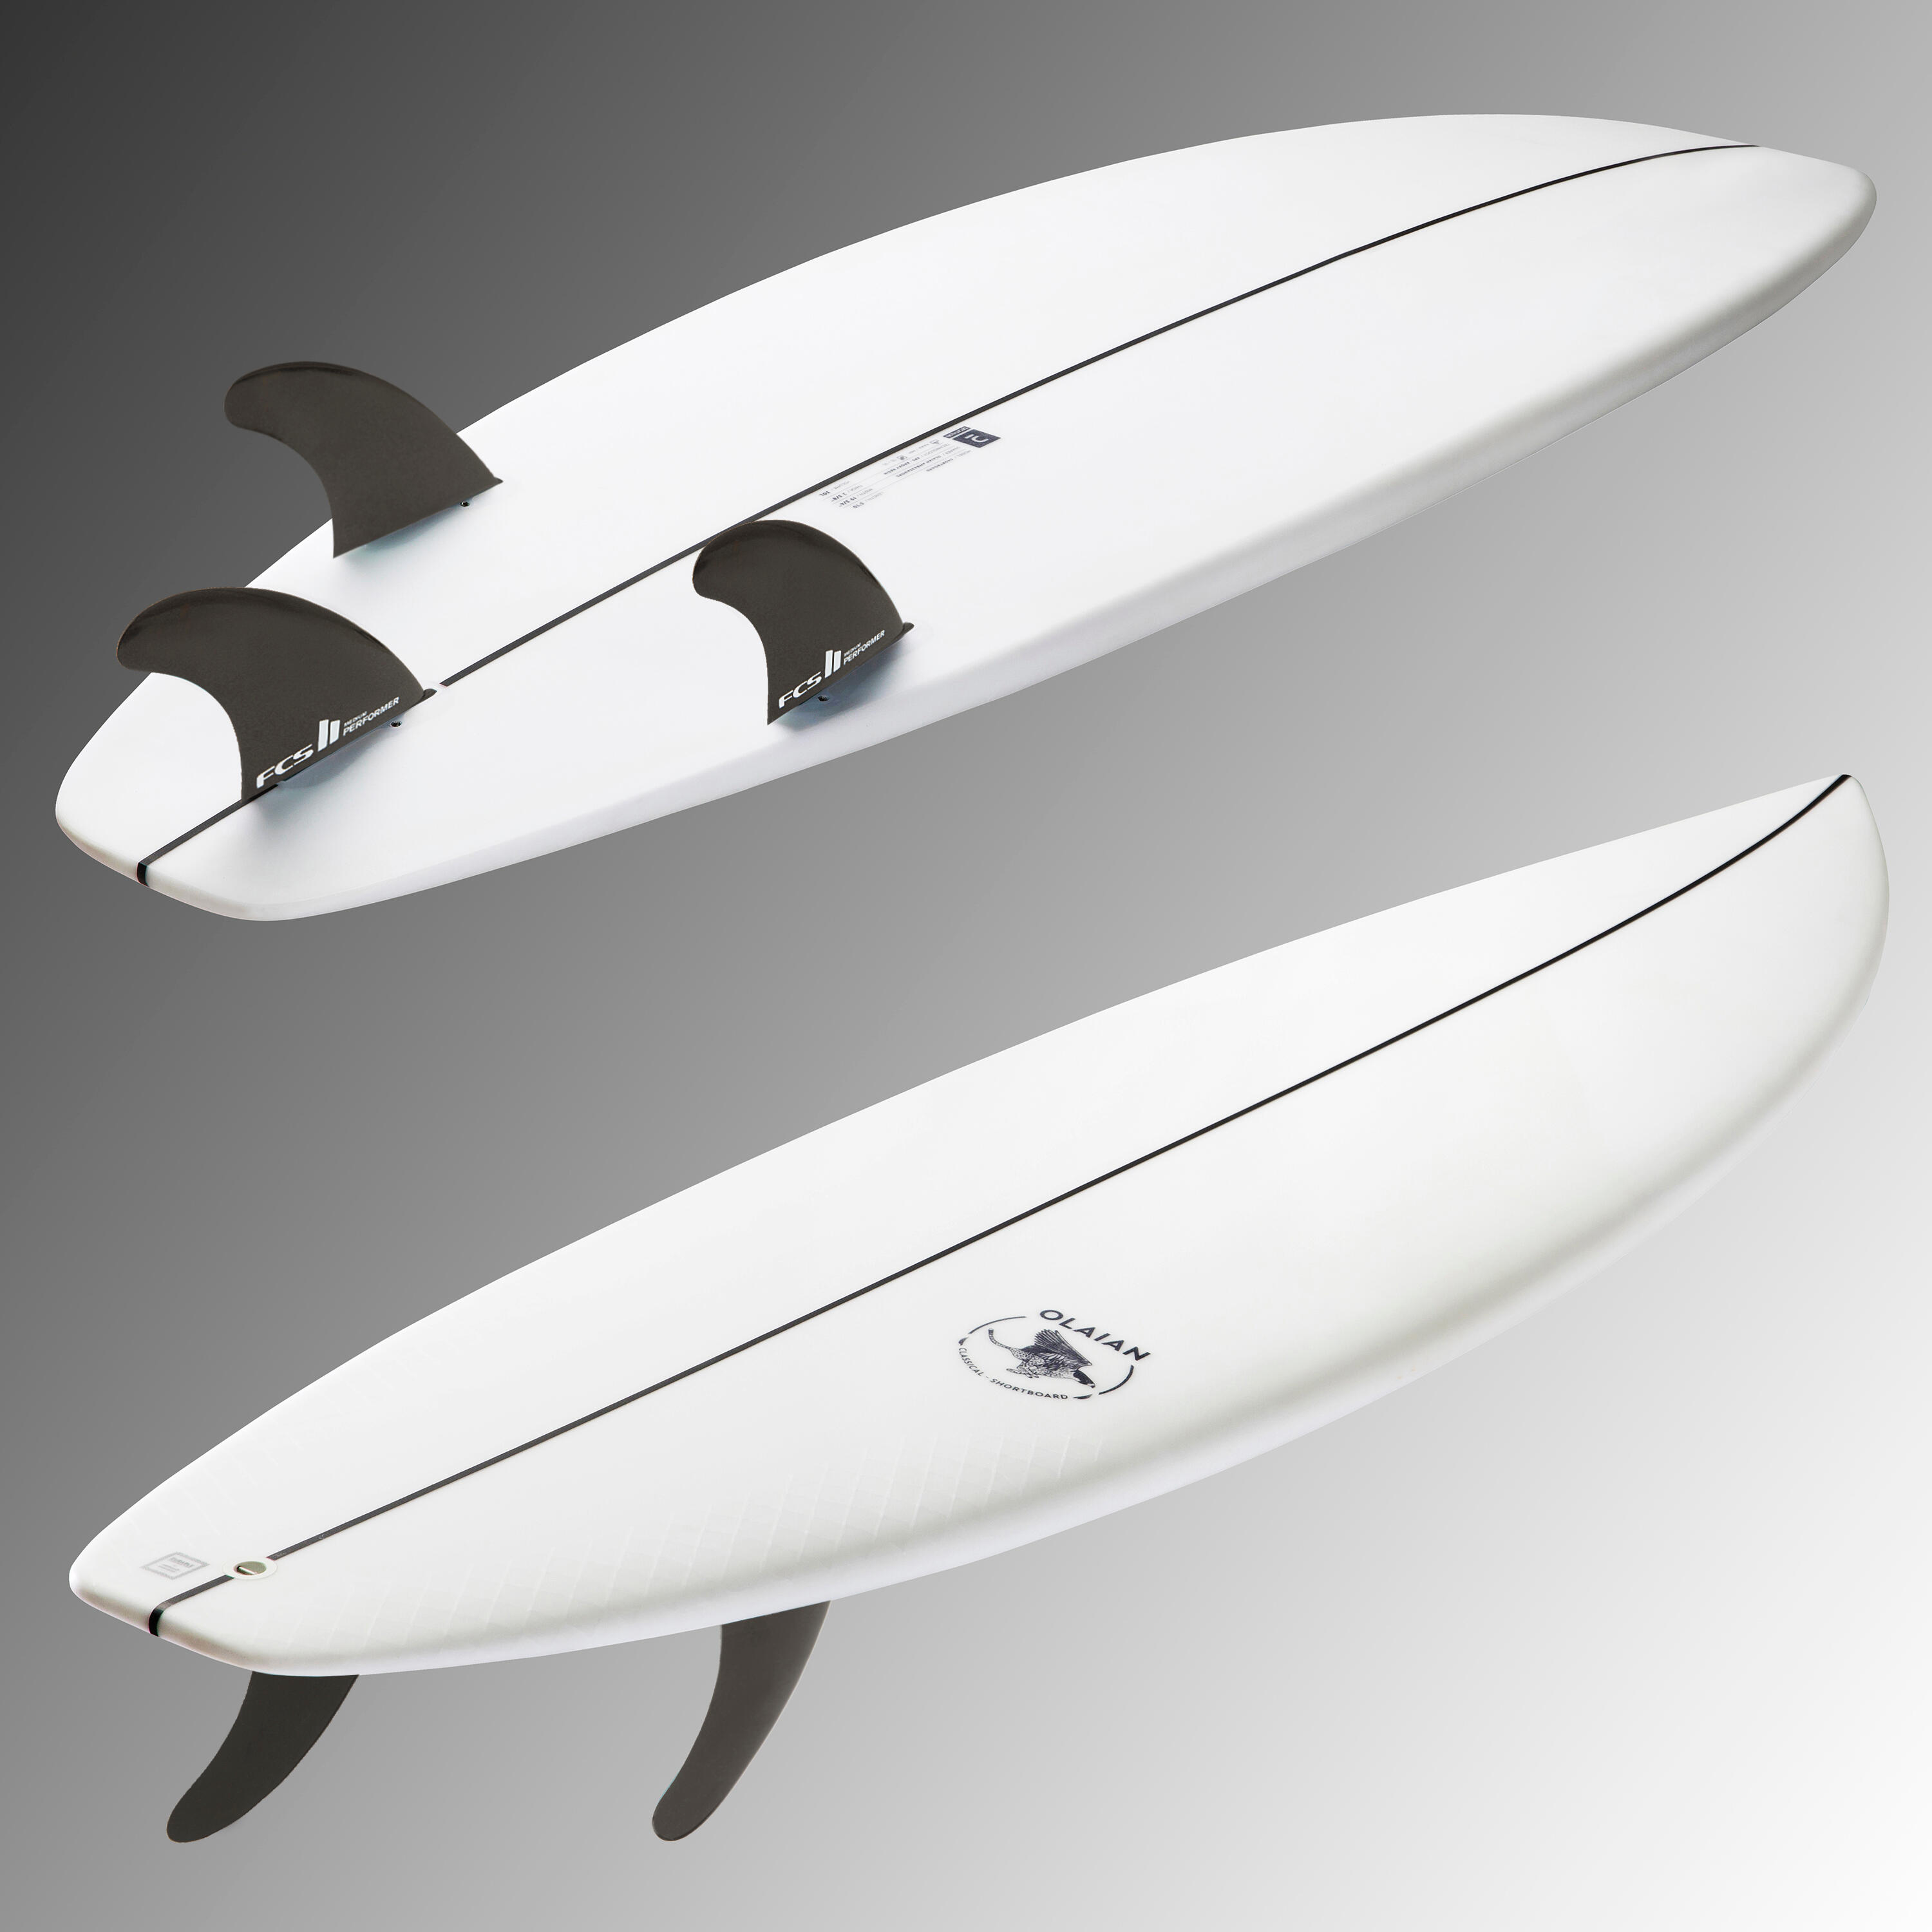 SHORTBOARD 900 5'10" 30 L. Supplied with 3 FCS2 fins 2/19